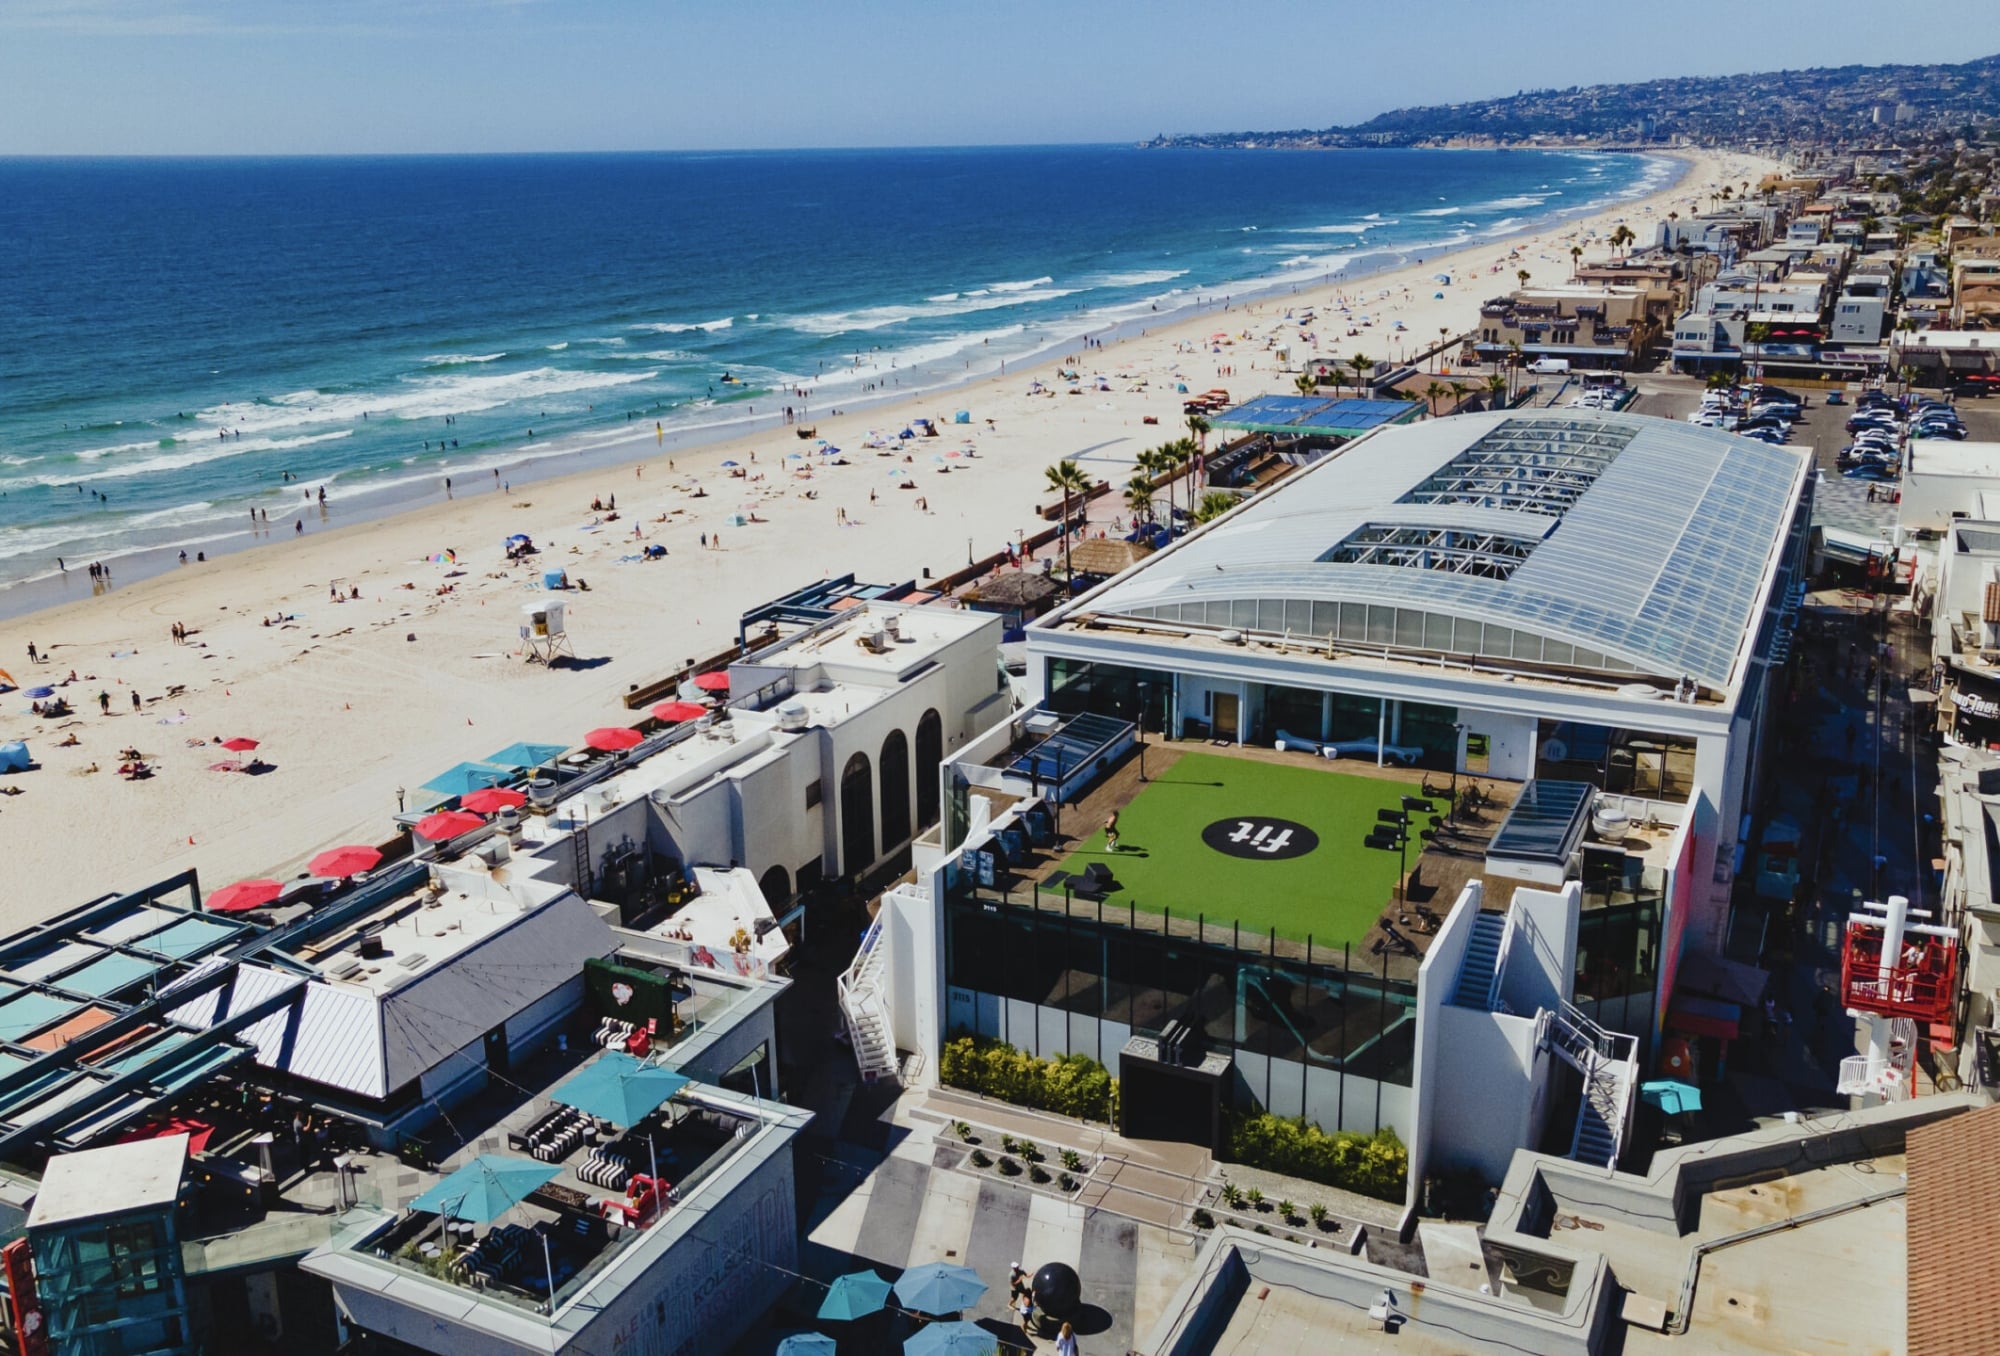 An aerial view of a beach and a building.